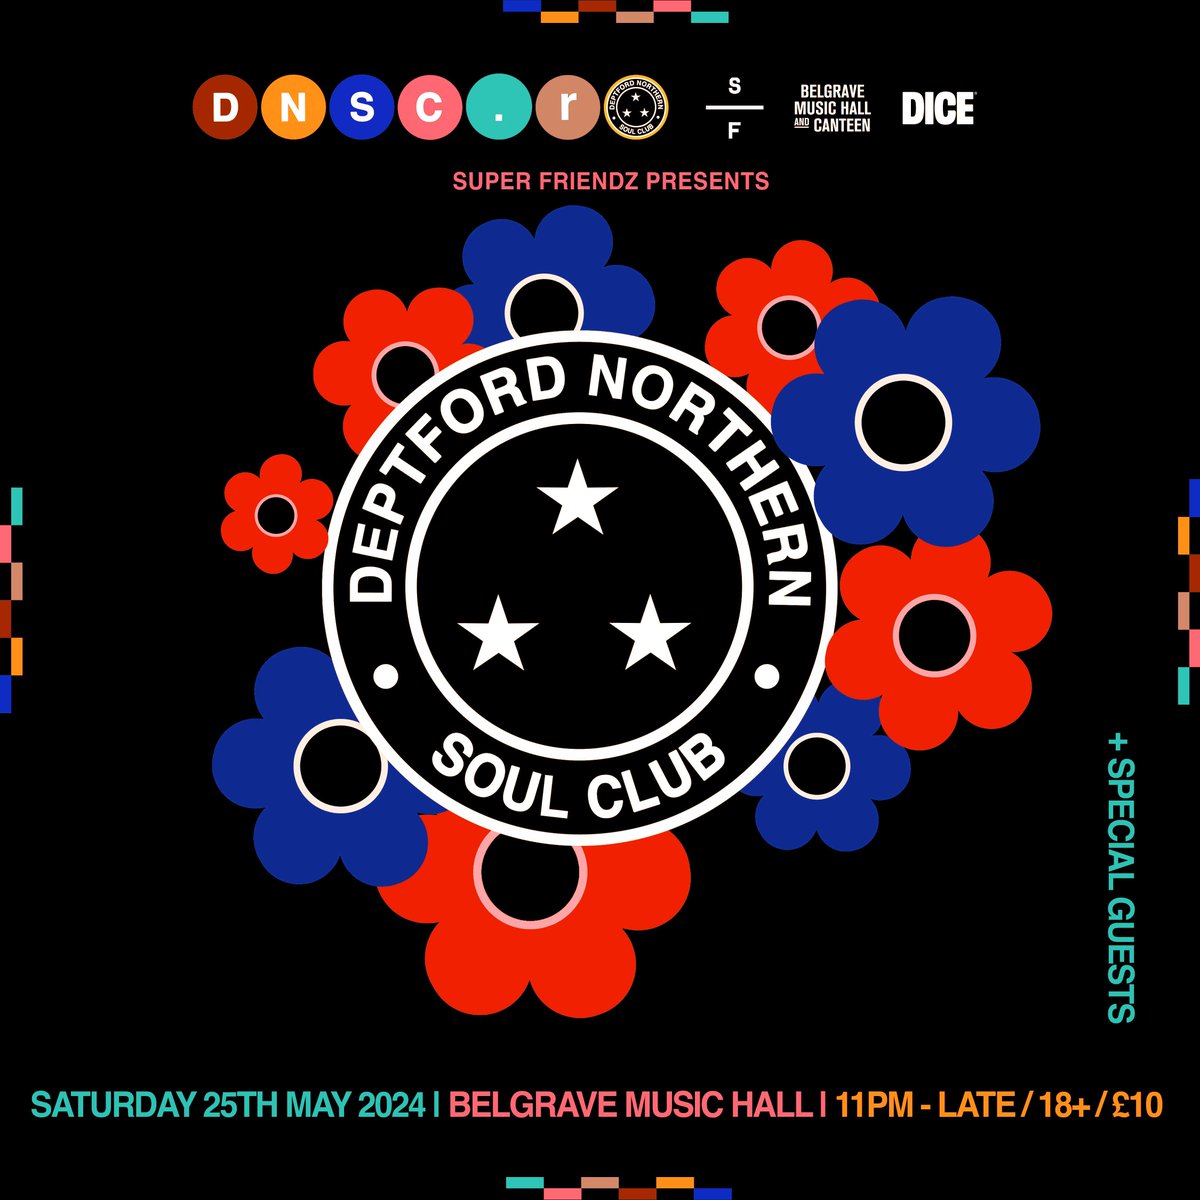 Deptford Northern soul club (@_dnsc_) make their return to The Music Hall May 25th for a night full of dancin'🕺 Special guests TBA! Tickets on sale now, head to DICE to grab yours! buff.ly/4amMs9s